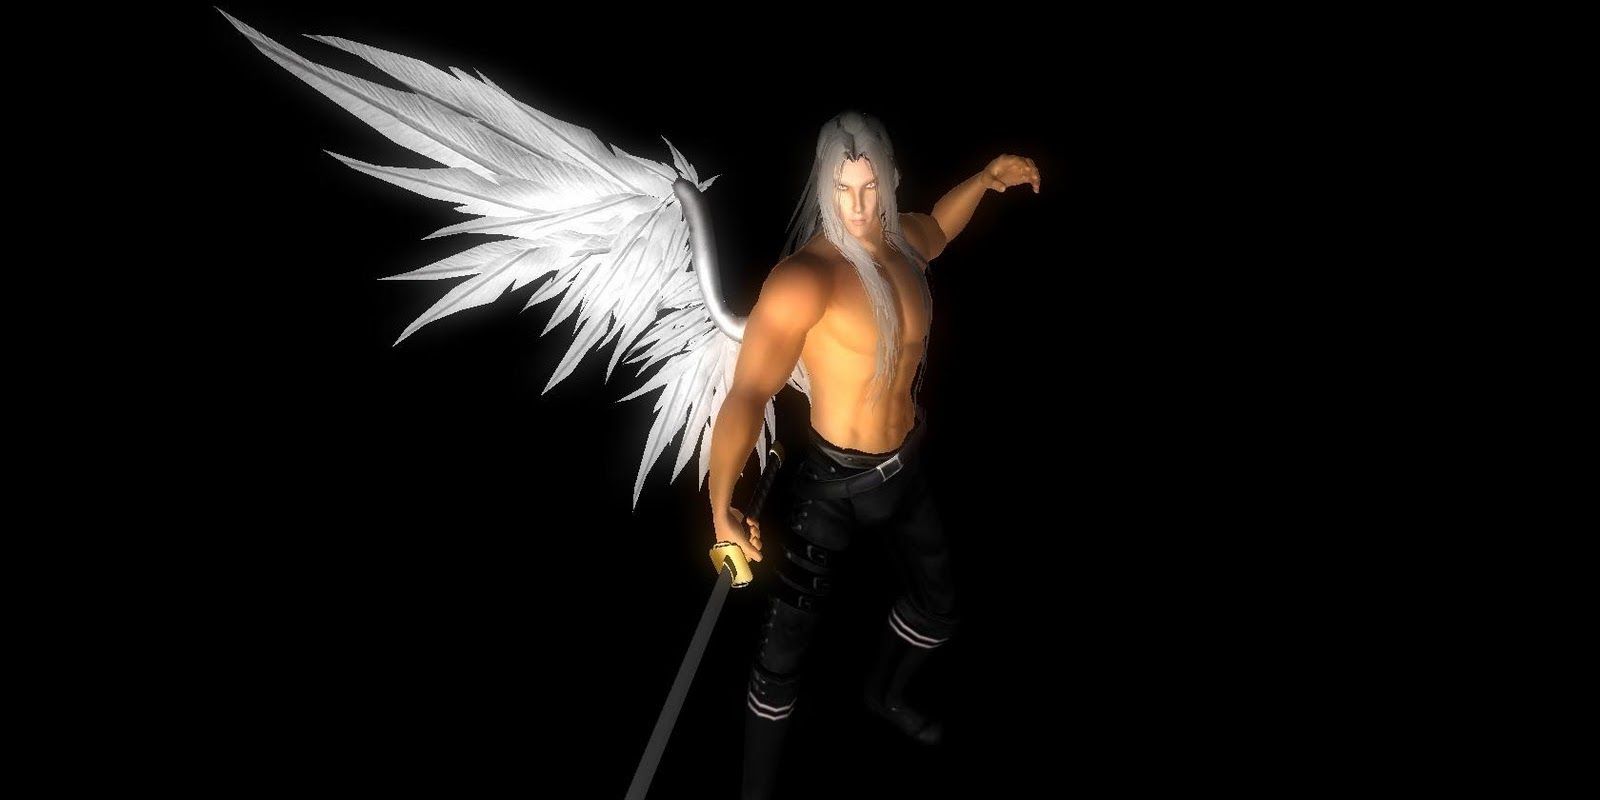 Sephiroth end fight in Final Fantasy 7